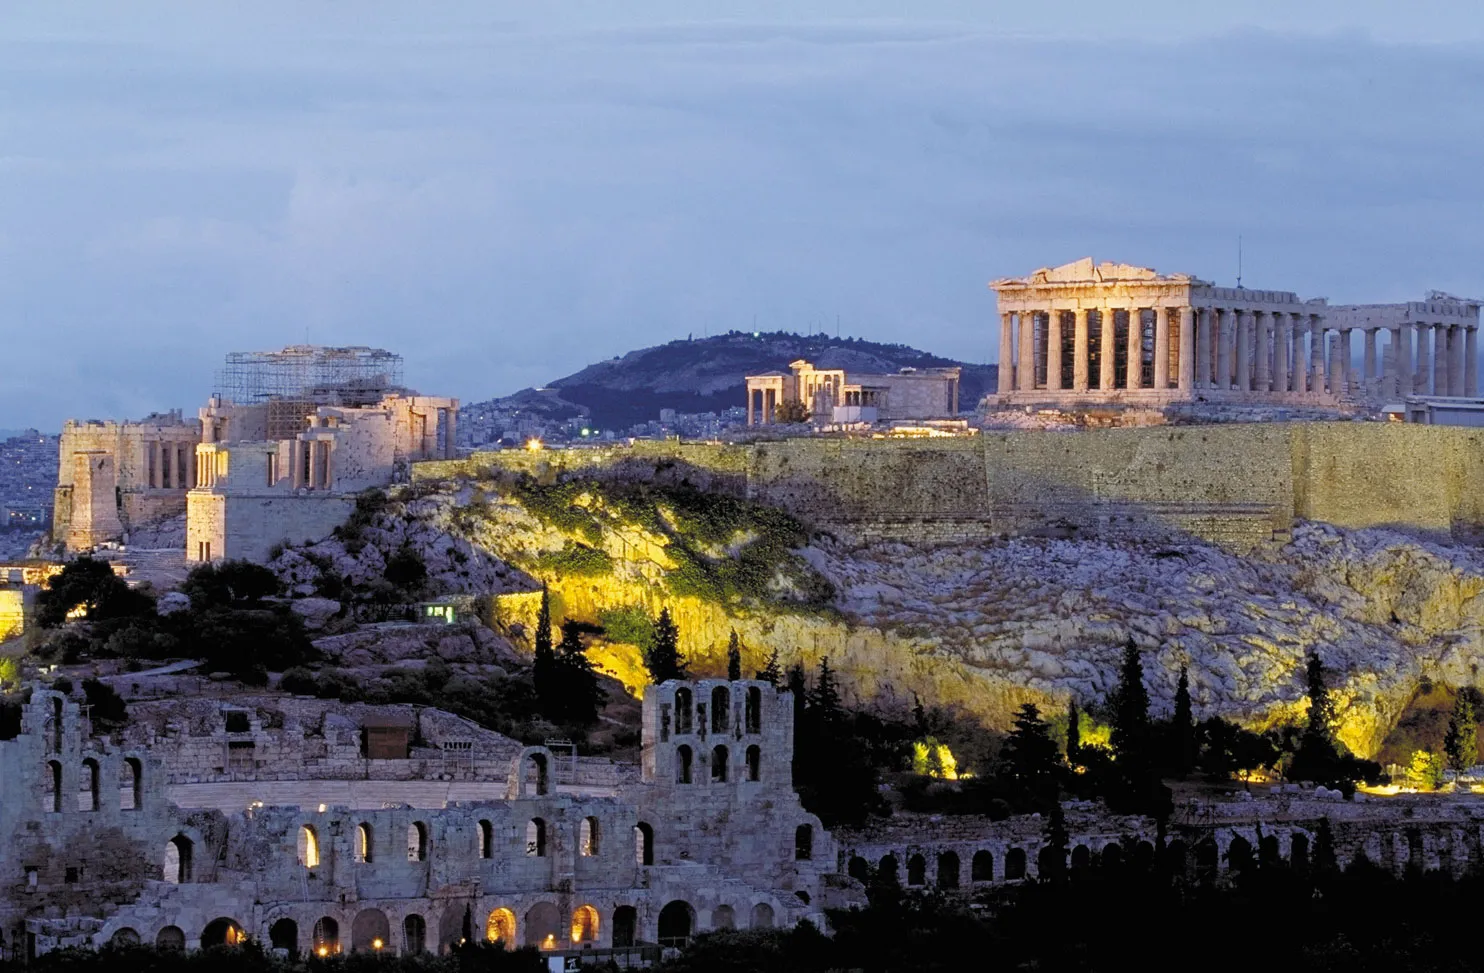 <p><span>Acropolis has been occupied continuously since the Bronze Age (16th-12th c. BC)</span></p><p><span>Previous temple to Athena Parthenos on the acropolis was destroyed by the Persians in 480 BC.</span></p><p><span>The Athenians left the acropolis bare for 33 years as part of an oath after the battle of Plataea as a reminder of barbaric impiety.</span></p><p><span>Pericles, organised the rebuilding of the acropolis.</span></p>